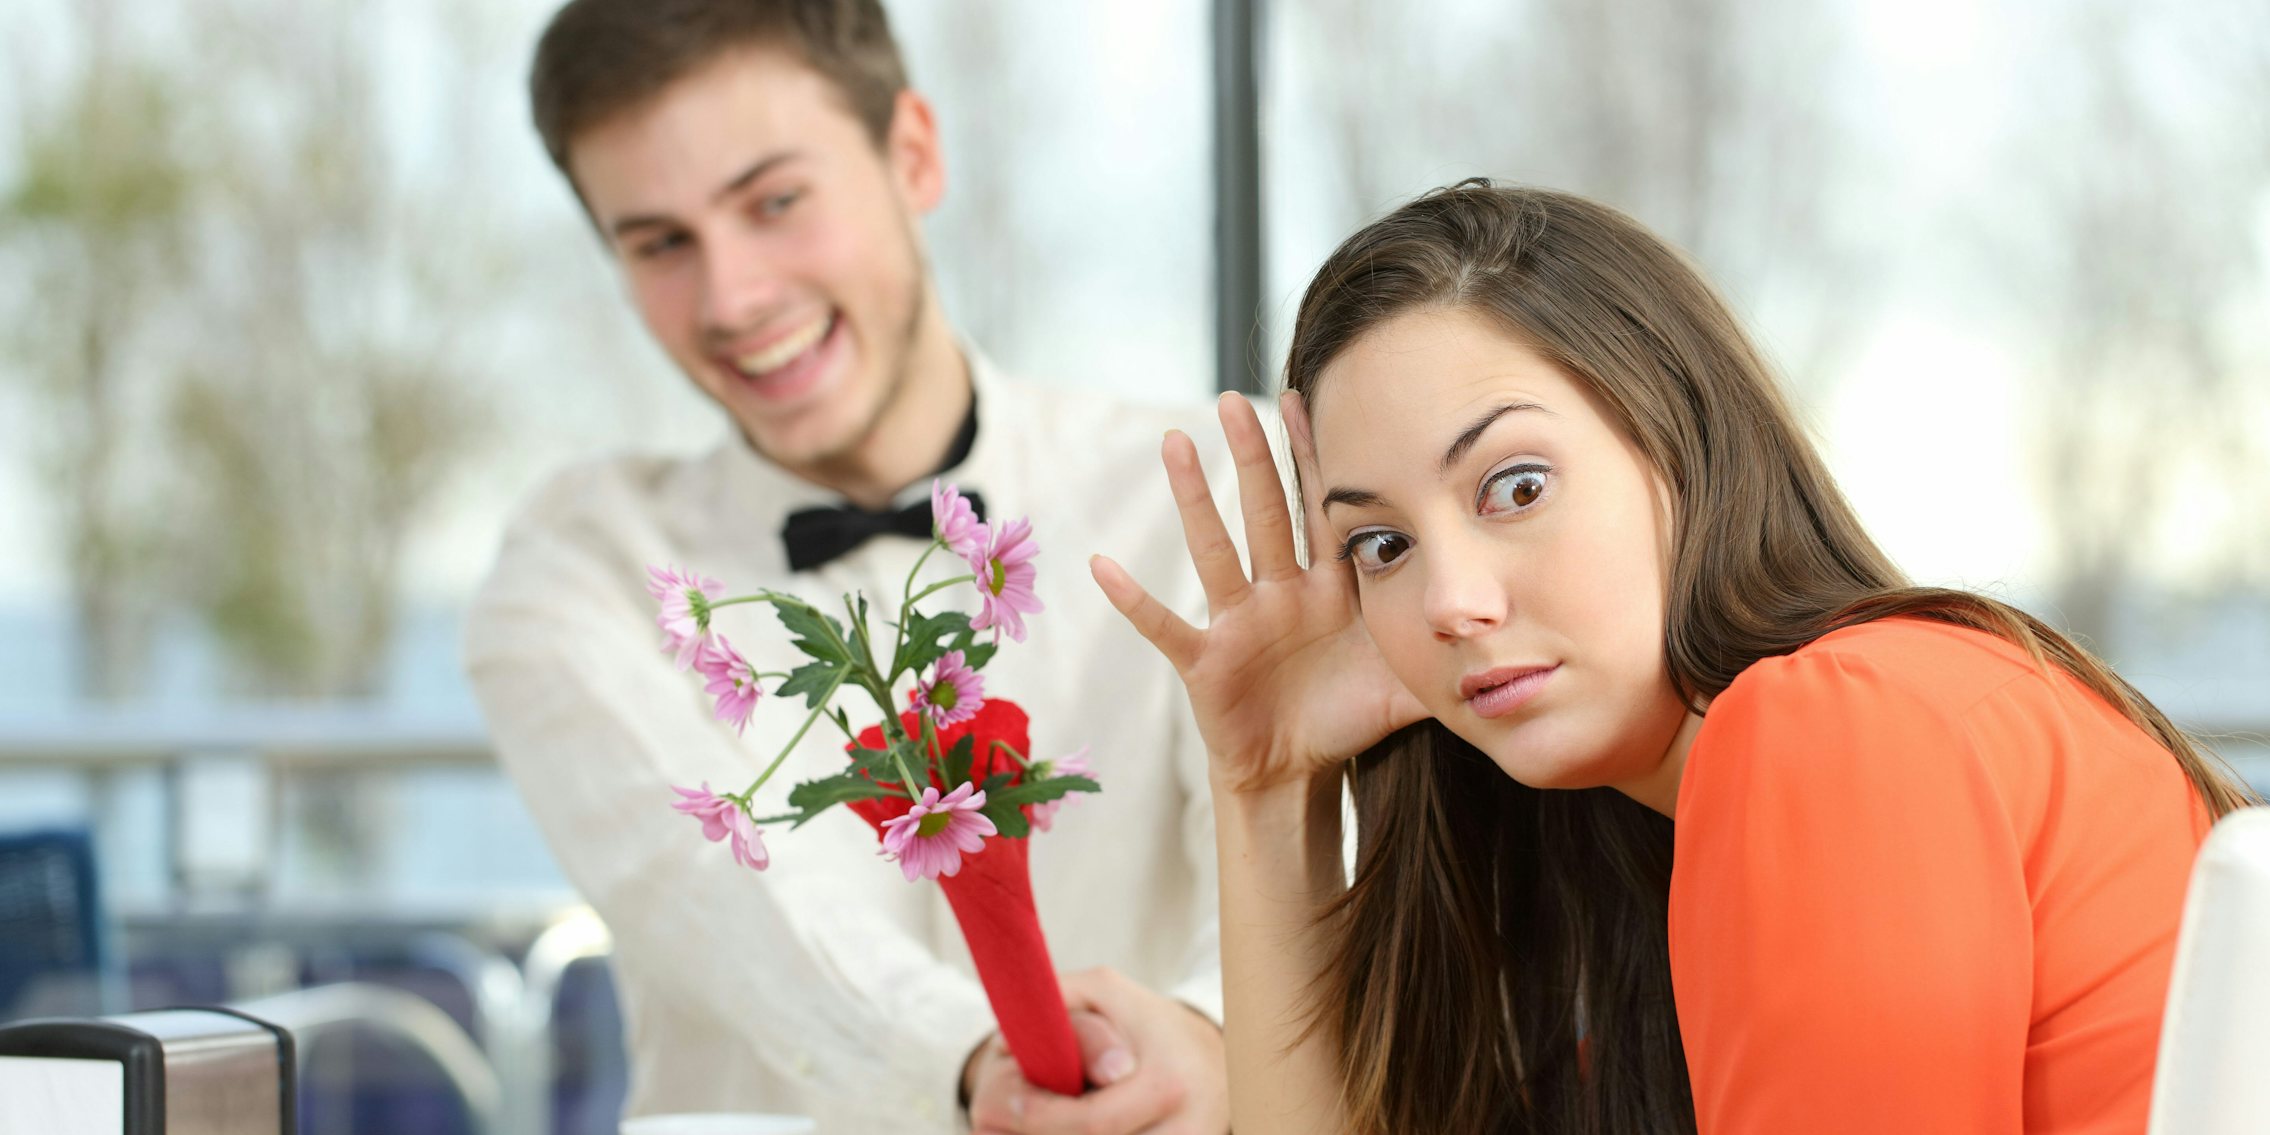 A woman rejecting a man giving her flowers.